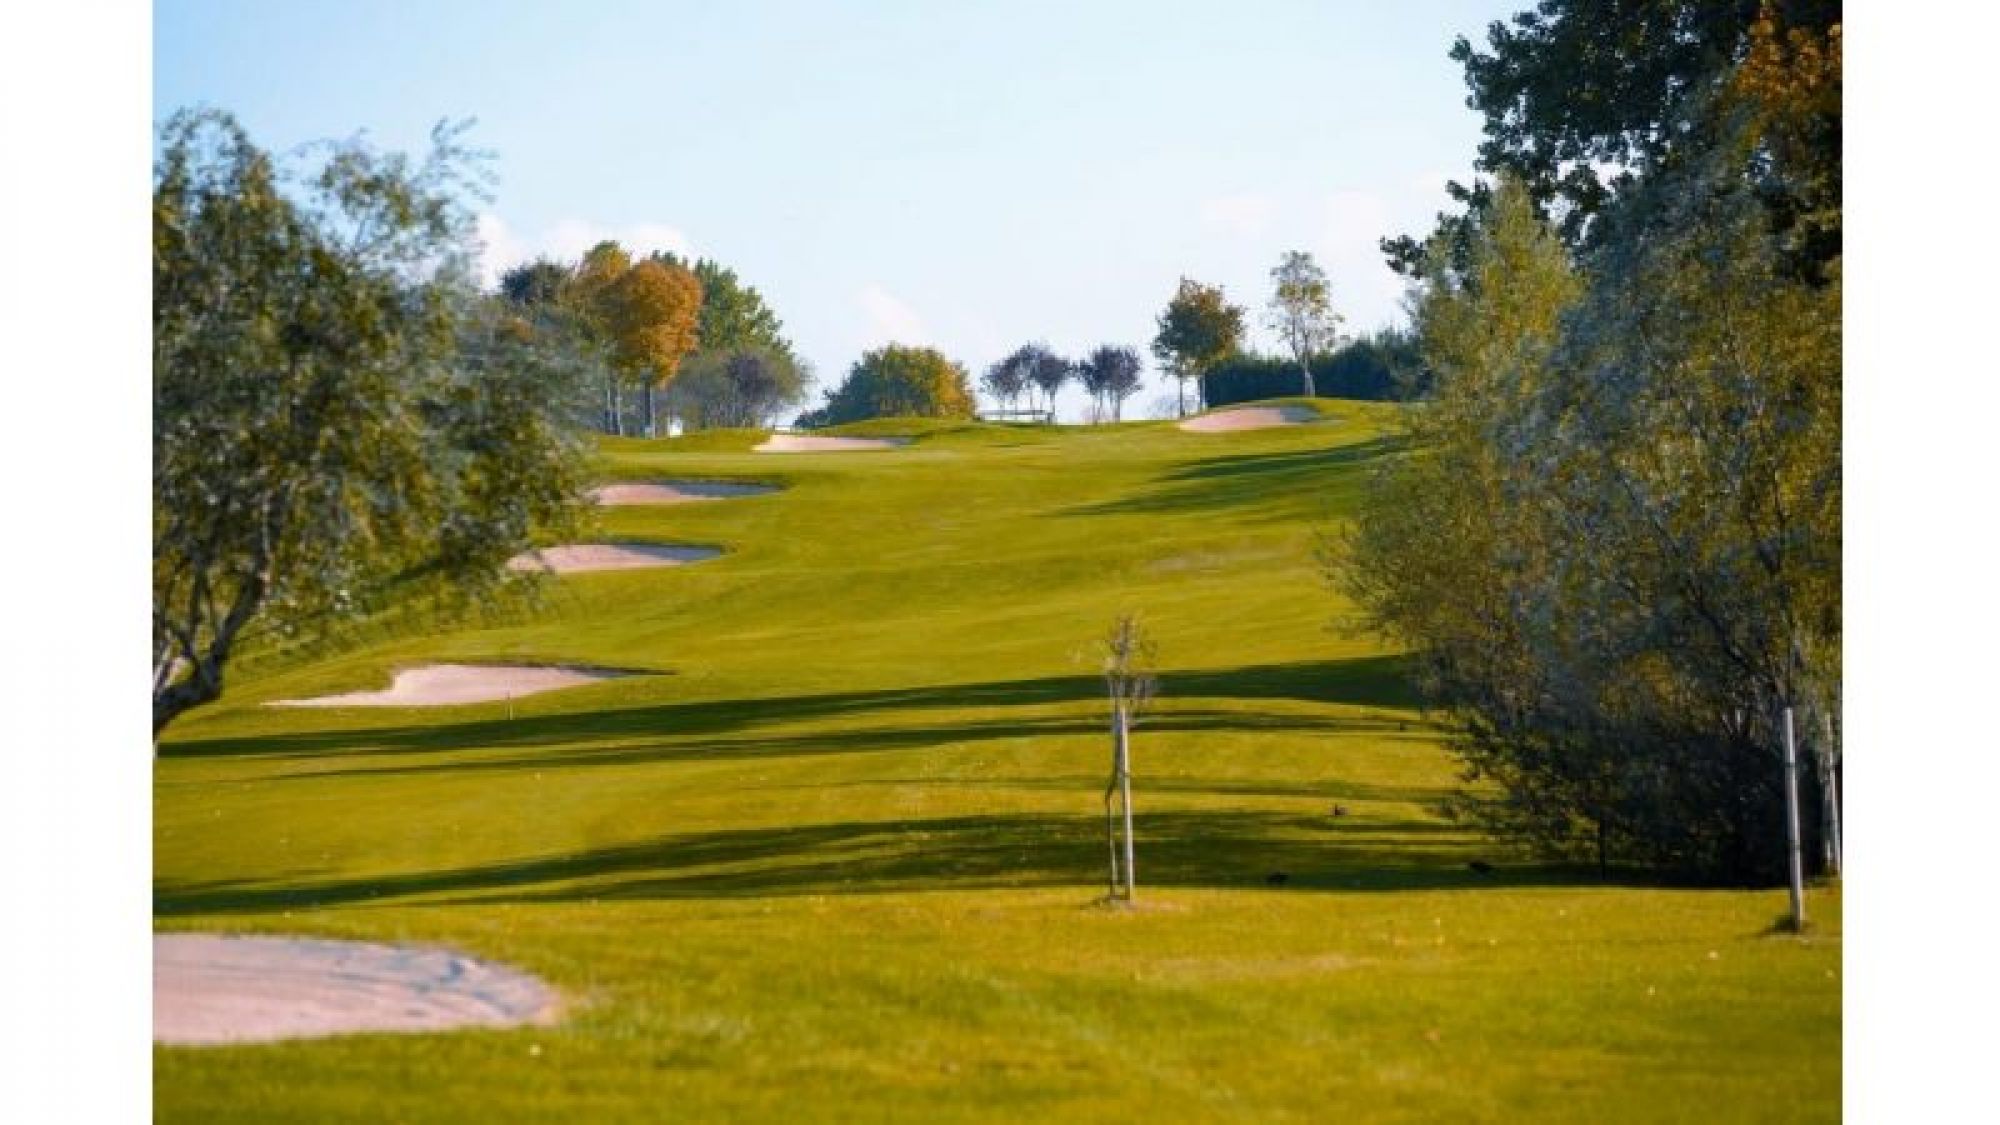 Rivieragolf features among the premiere golf course in Northern Italy